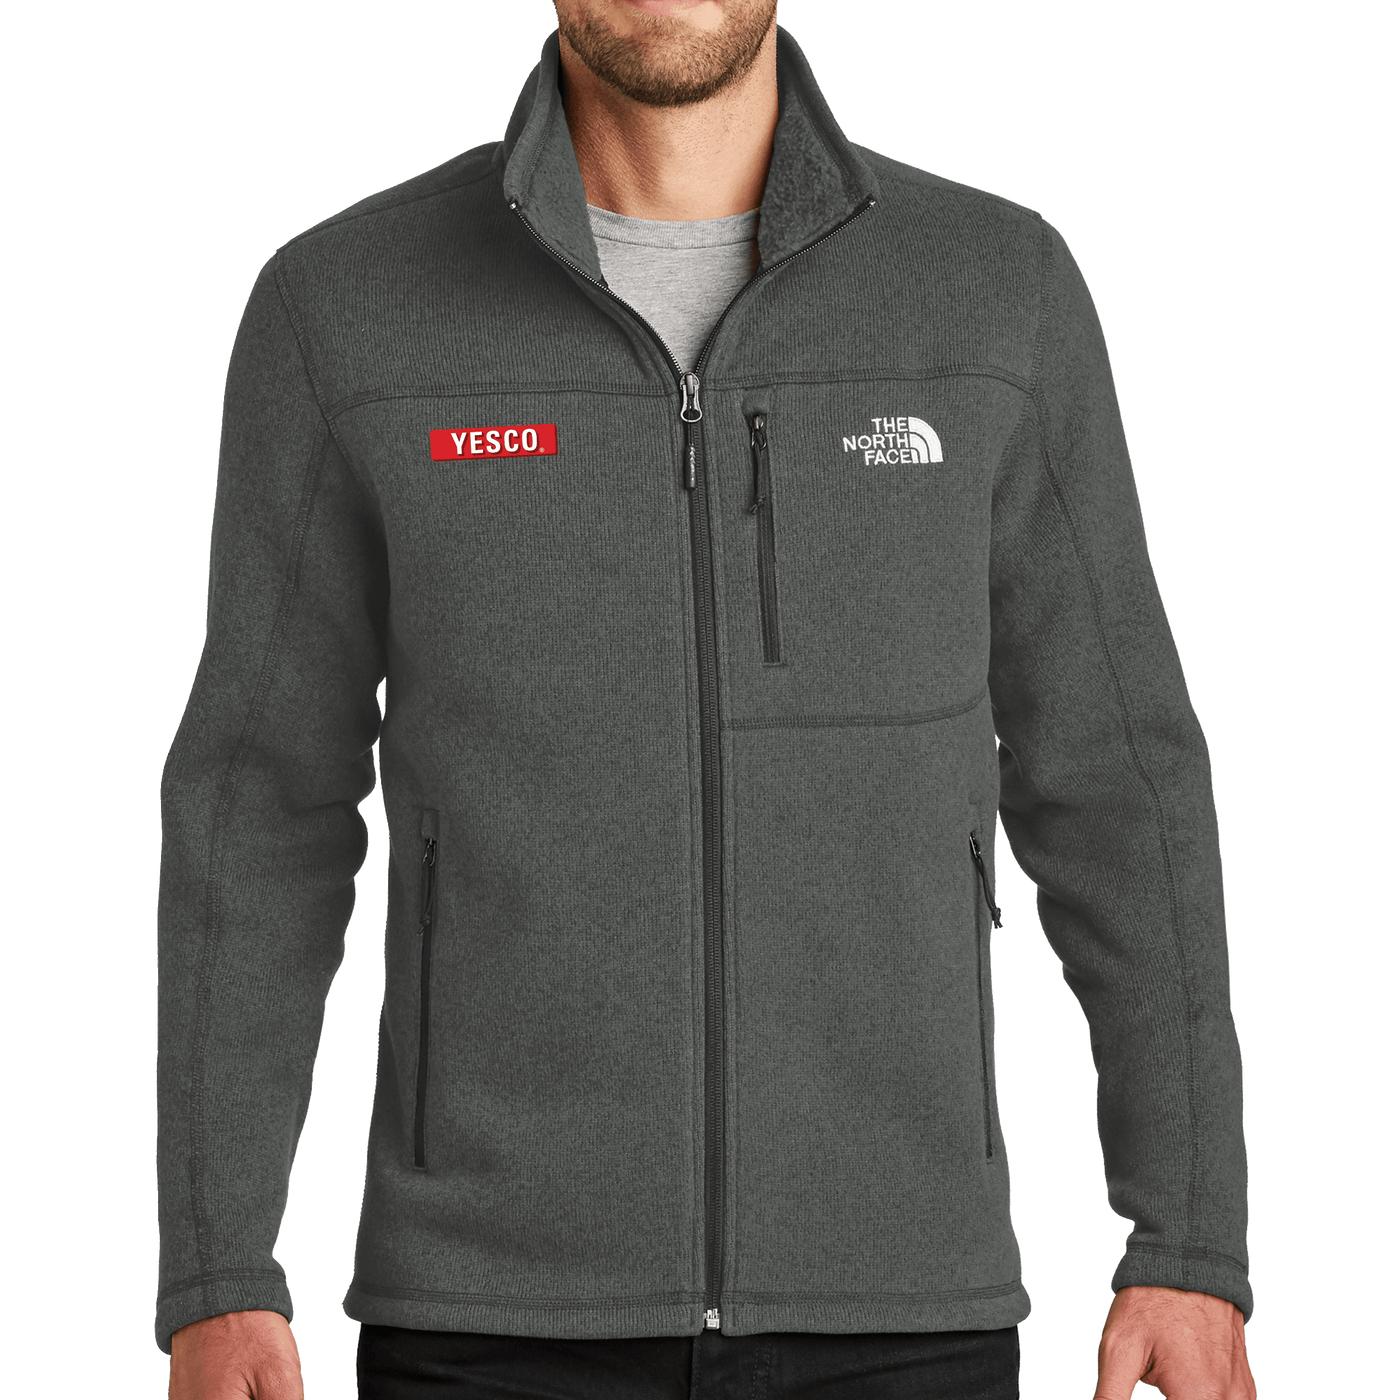 Outdoor- The North Face Sweater Fleece Jacket – YESCO STORE